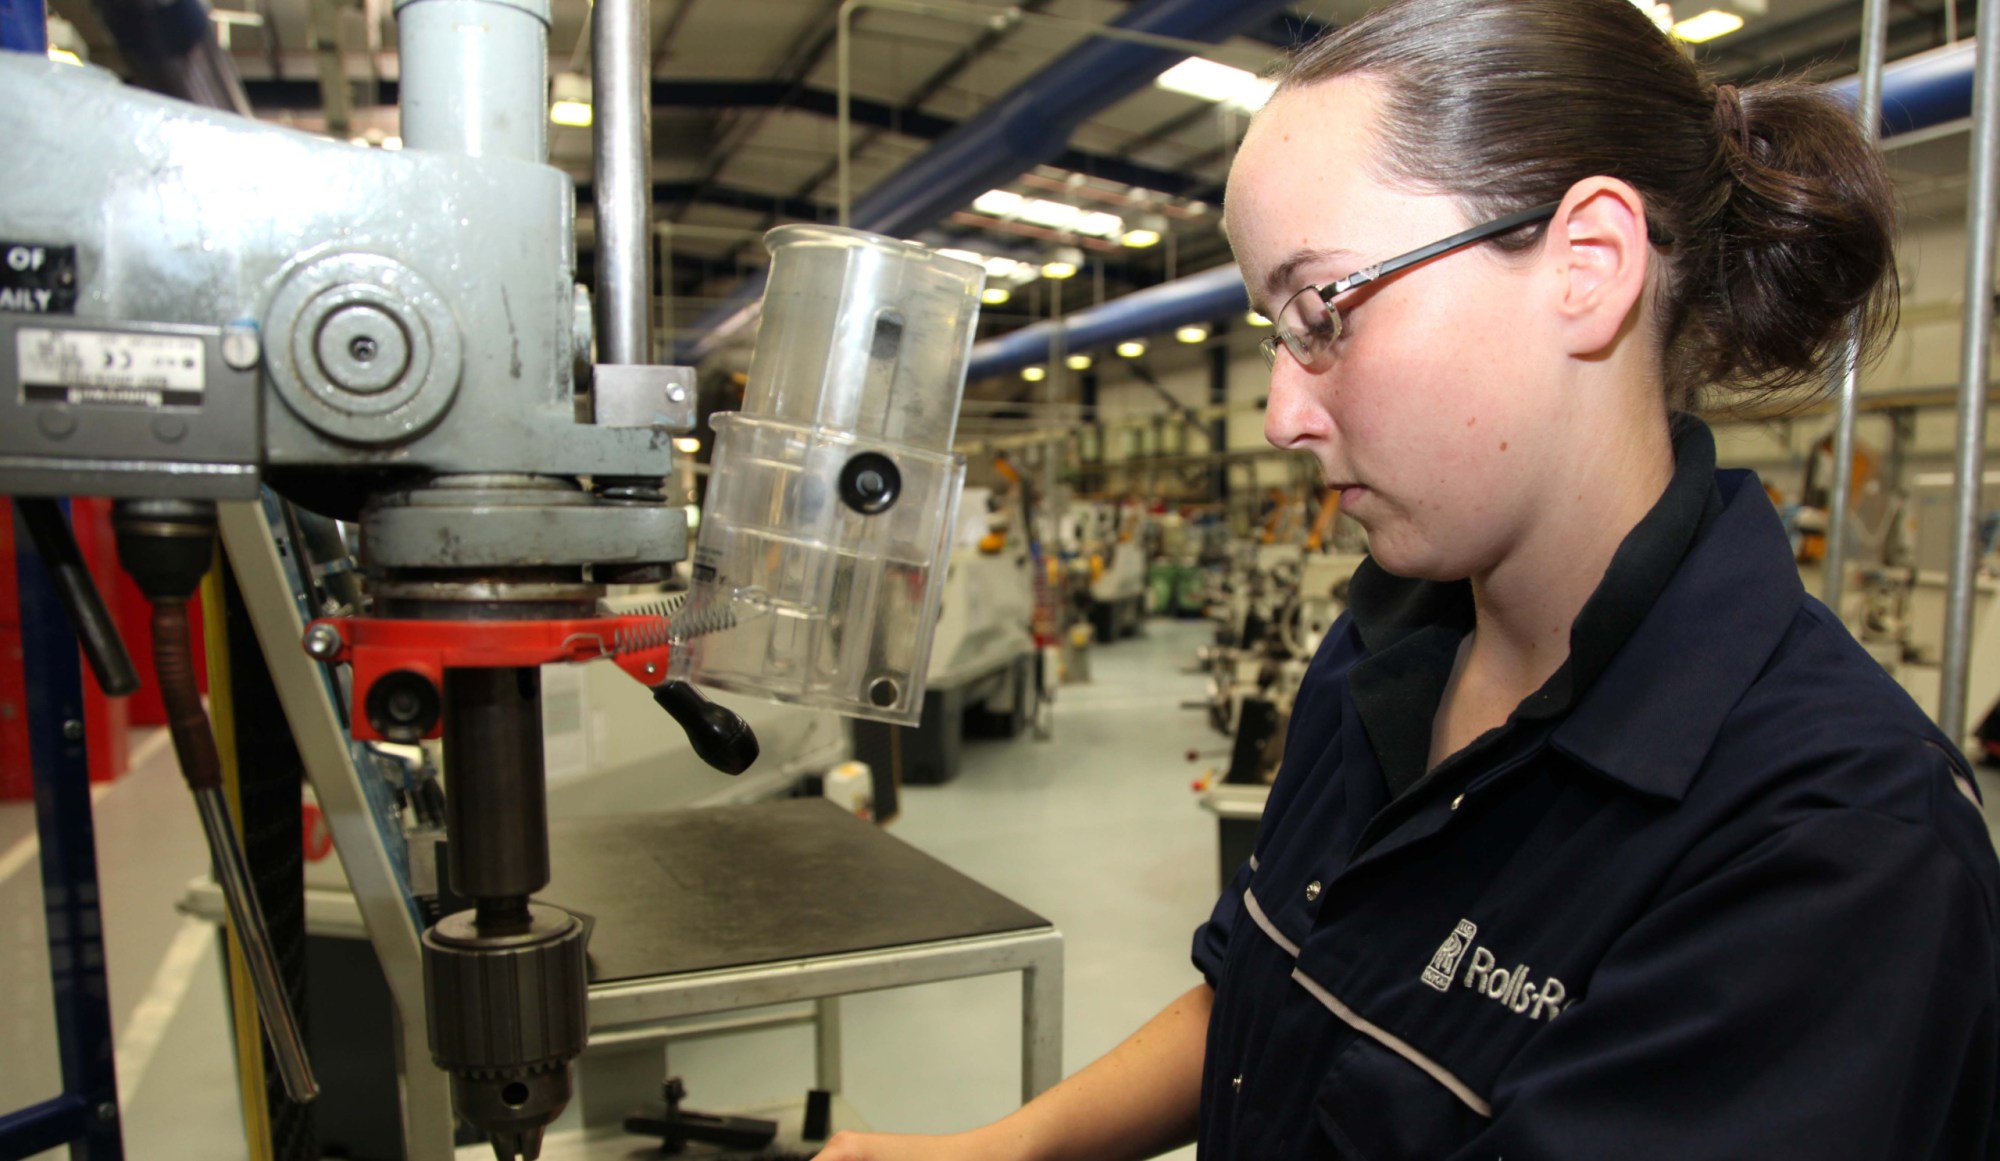 An apprentice works at a British Rolls-Royce plant. Apprenticeships can create promising new pathways for young workers to well-paying, middle-class jobs. (Flickr/Apprenticeships)